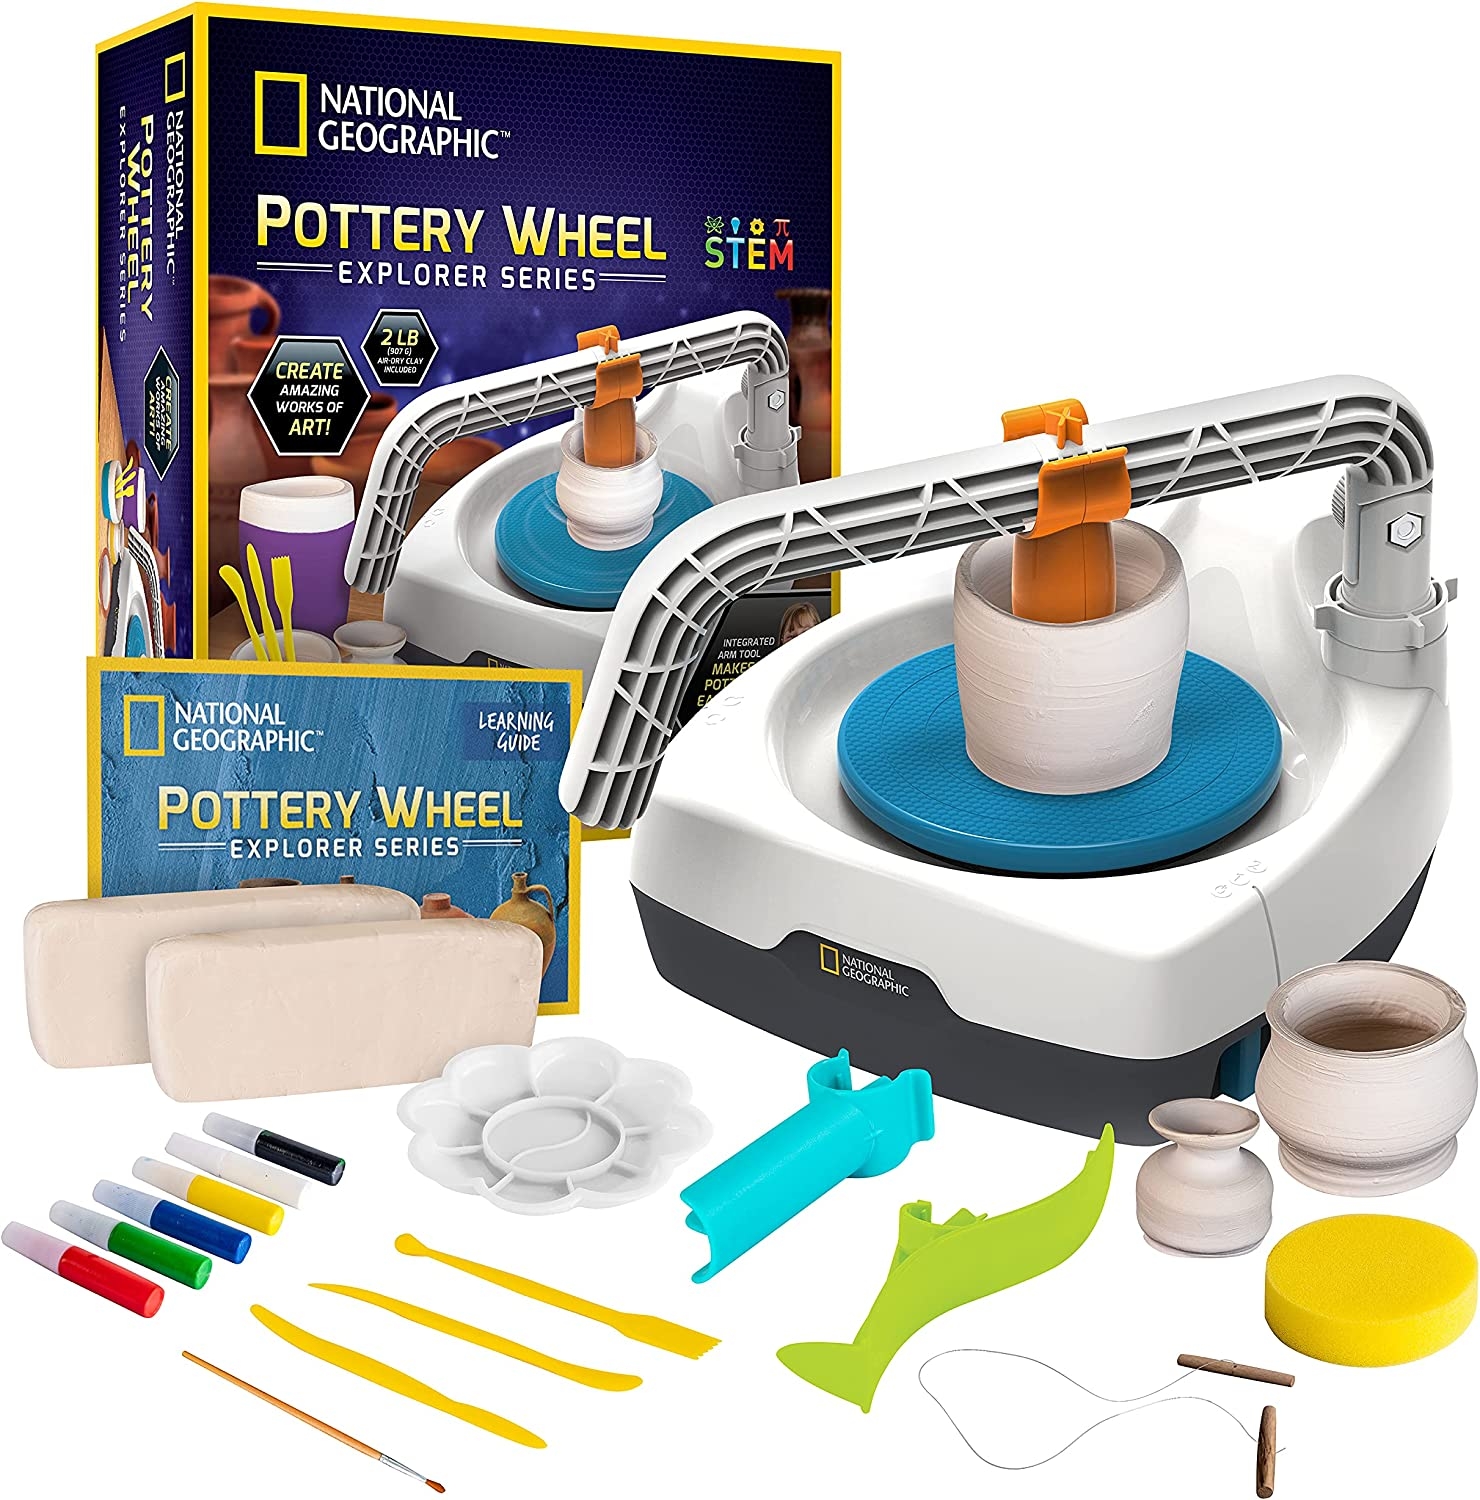 NATIONAL GEOGRAPHIC Kid’s Pottery Wheel – Complete Pottery Kit for Kids, Electric Motor, 2 lbs. Air Dry Clay, Sculpting Clay